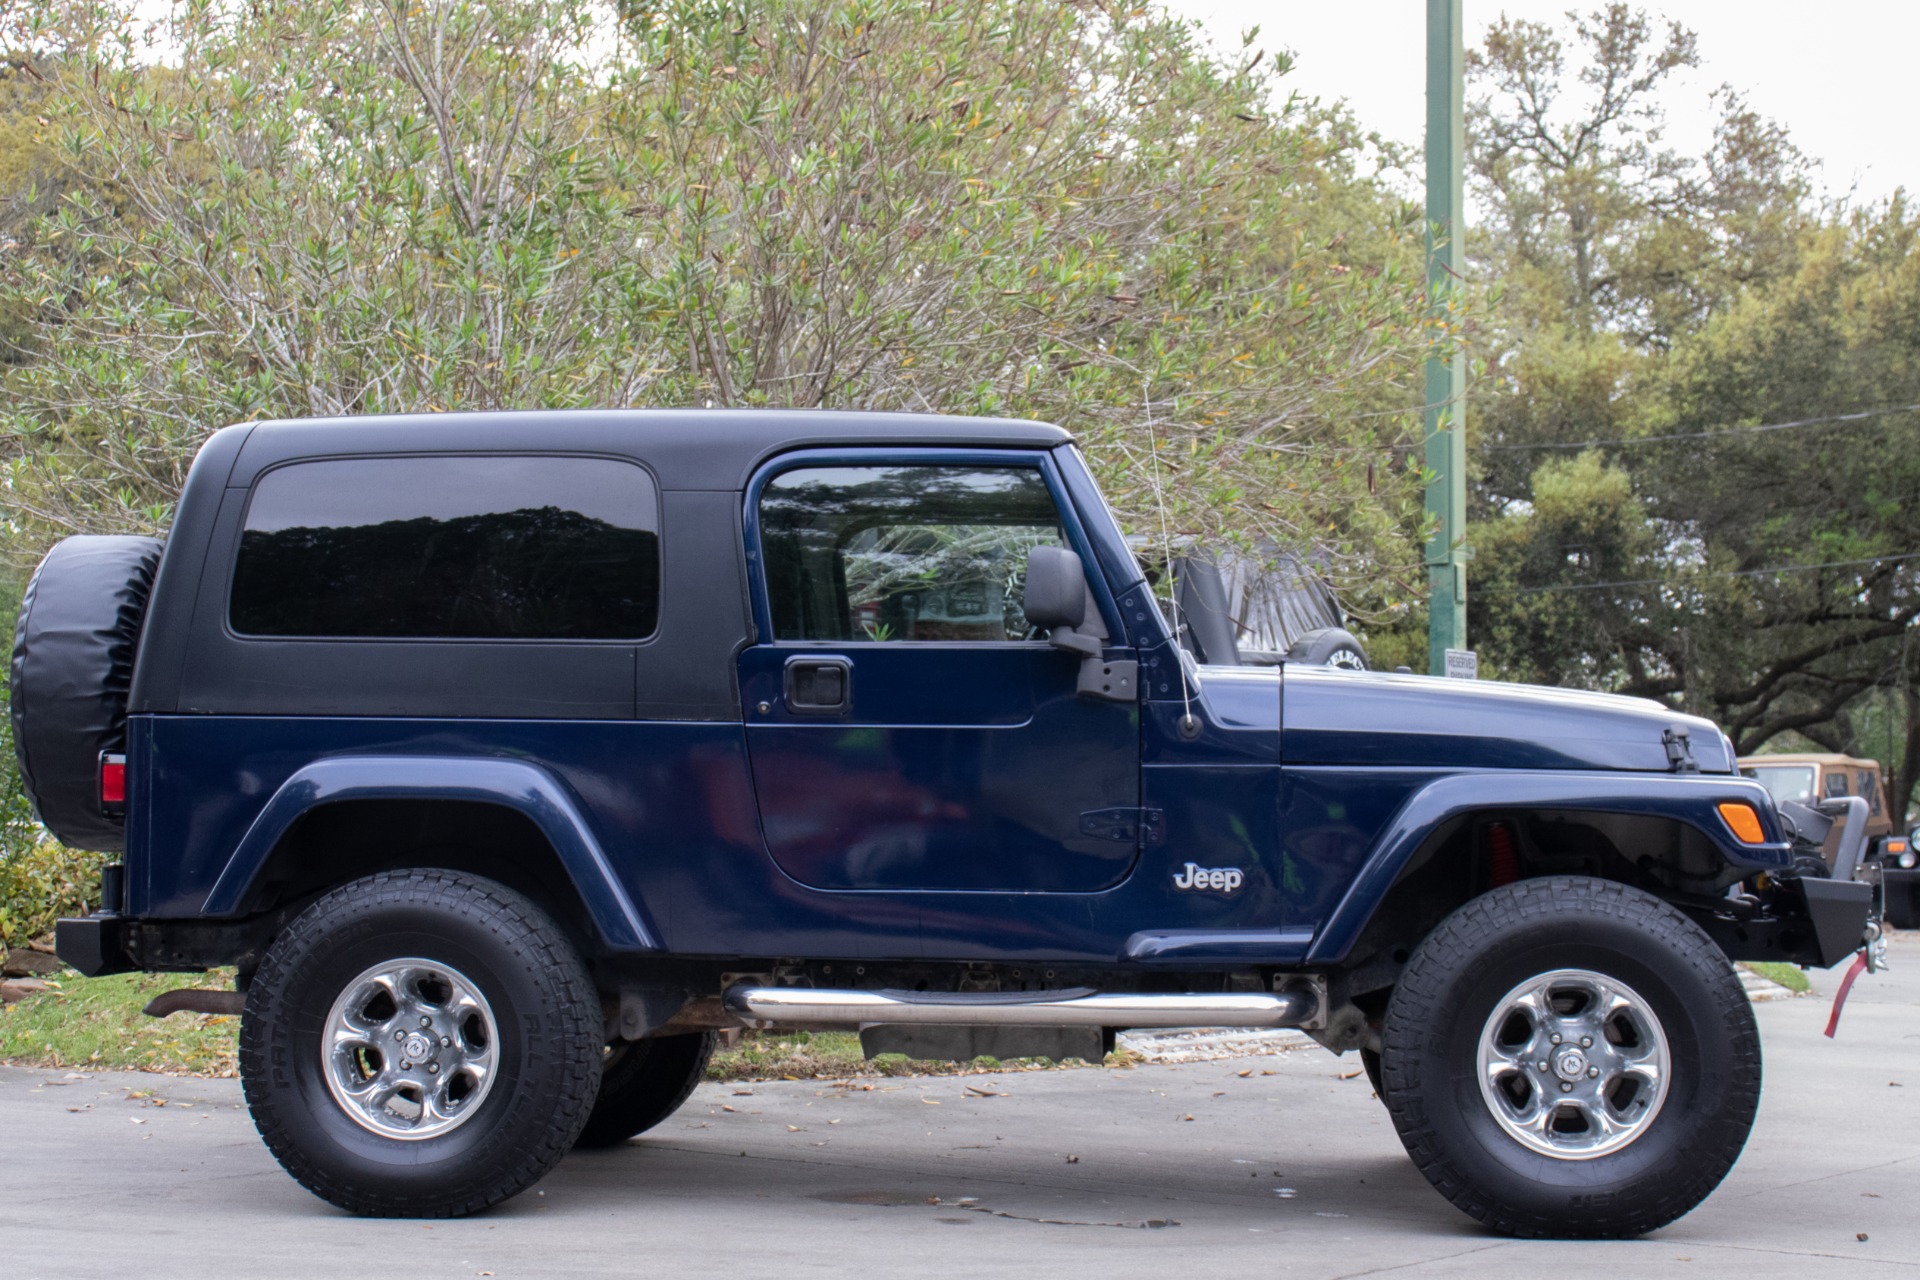 Used 2006 Jeep Wrangler Unlimited For Sale ($21,995) | Select Jeeps Inc.  Stock #706216